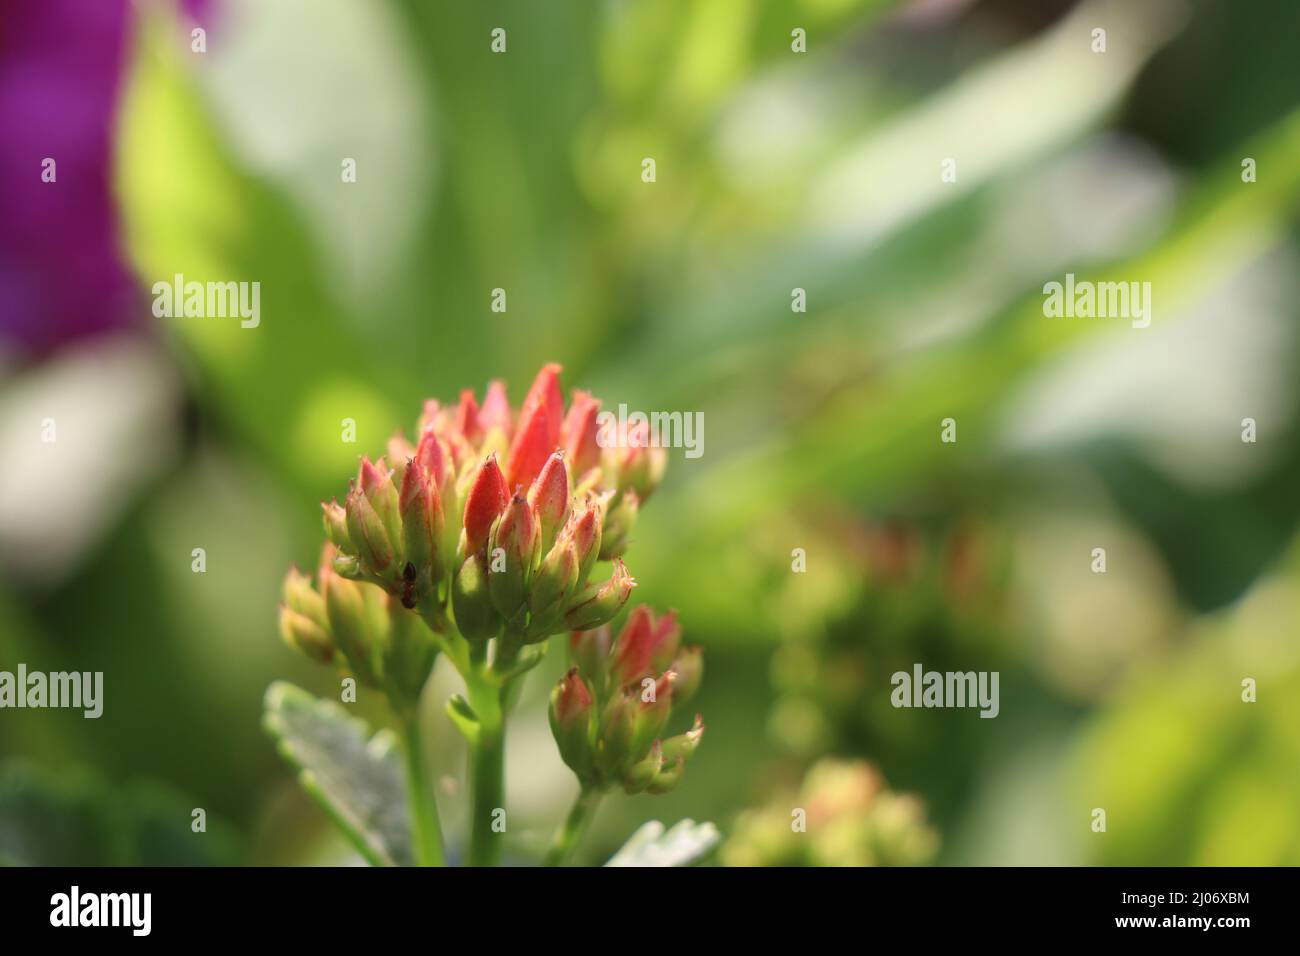 Closeup of flowering plant with a fresh flower bud on a home garden isolated on natural greenery background Stock Photo